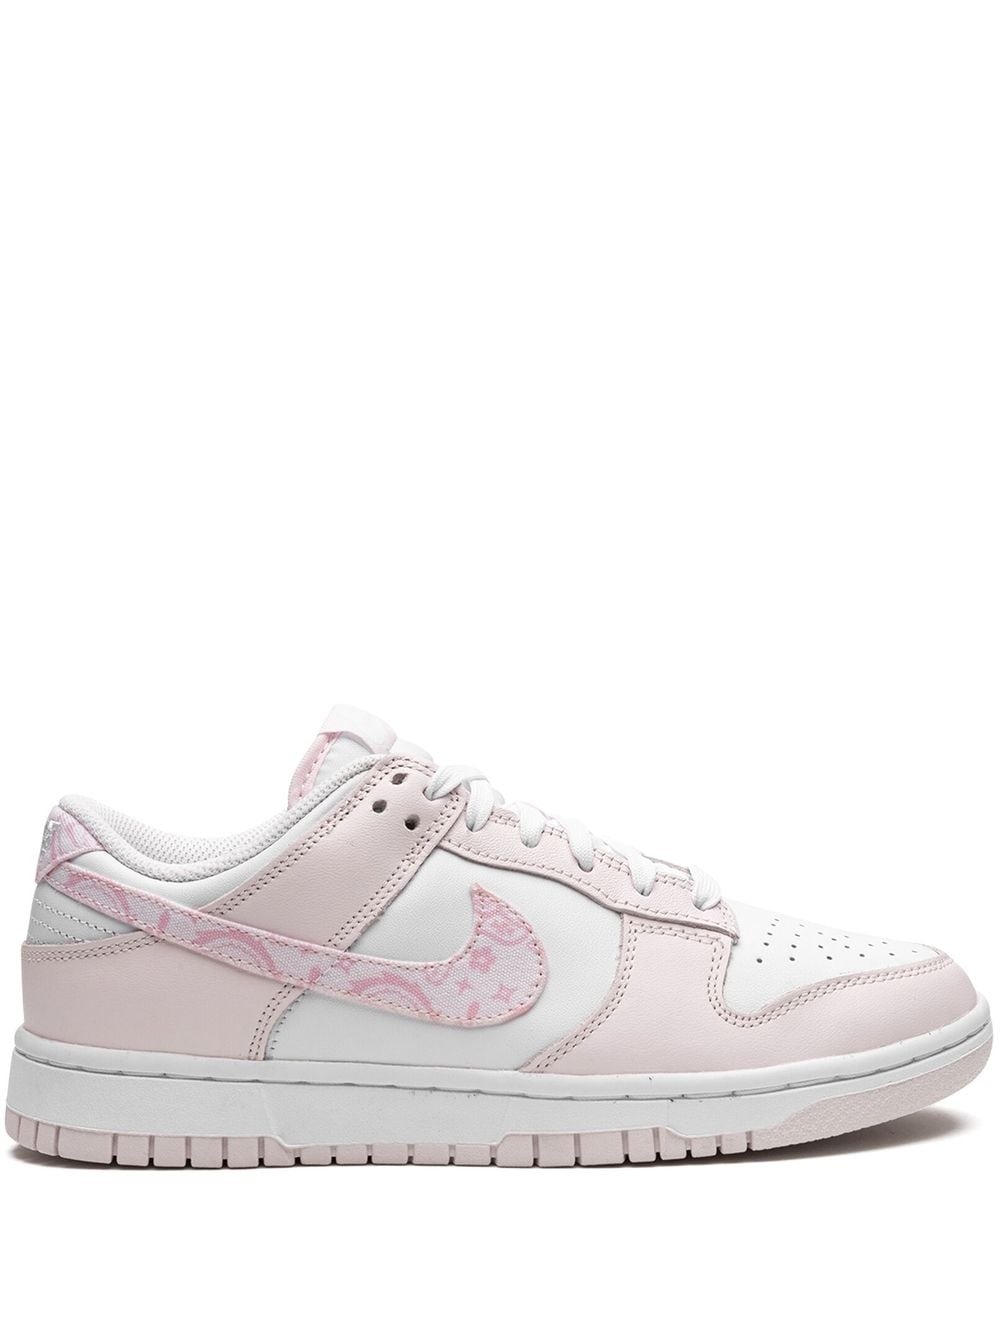 Dunk Low "Pink Paisley" sneakers - 1